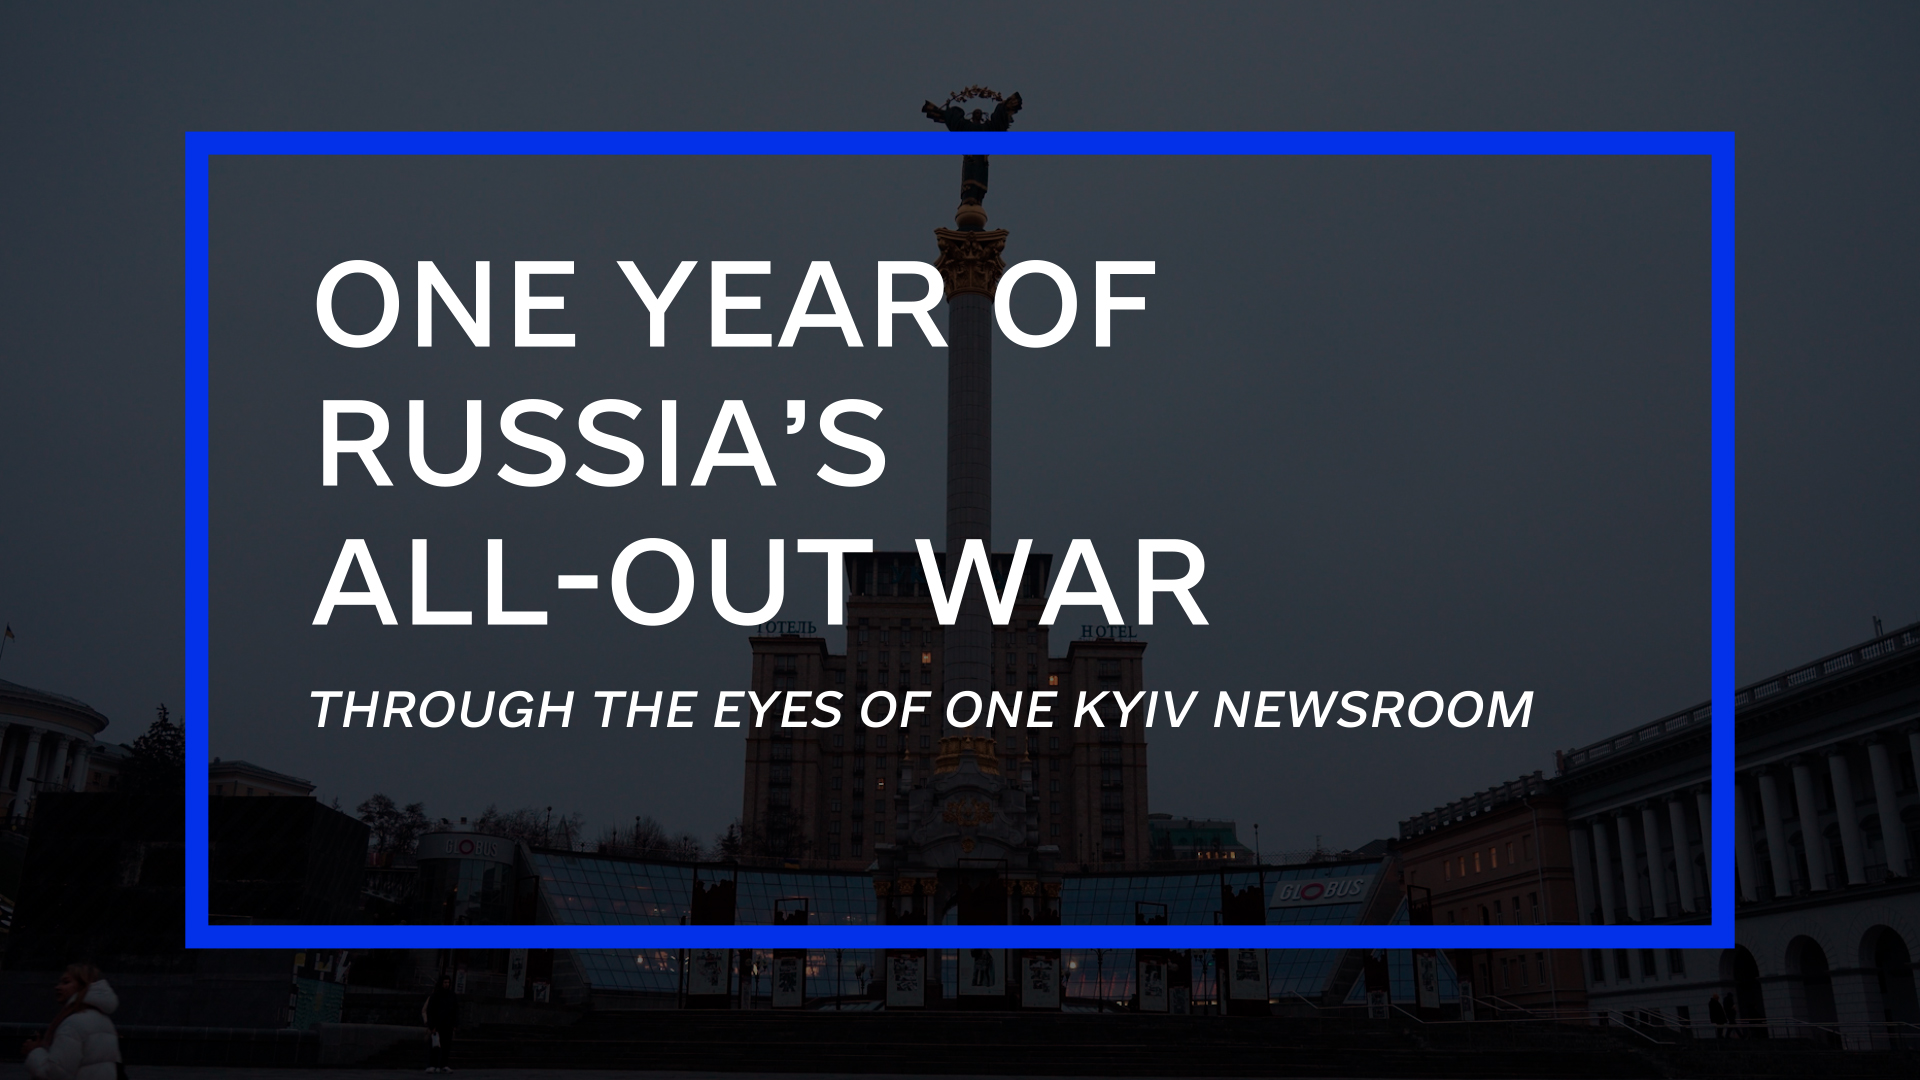 Video: One year of Russia’s all-out war through the eyes of one Ukrainian newsroom